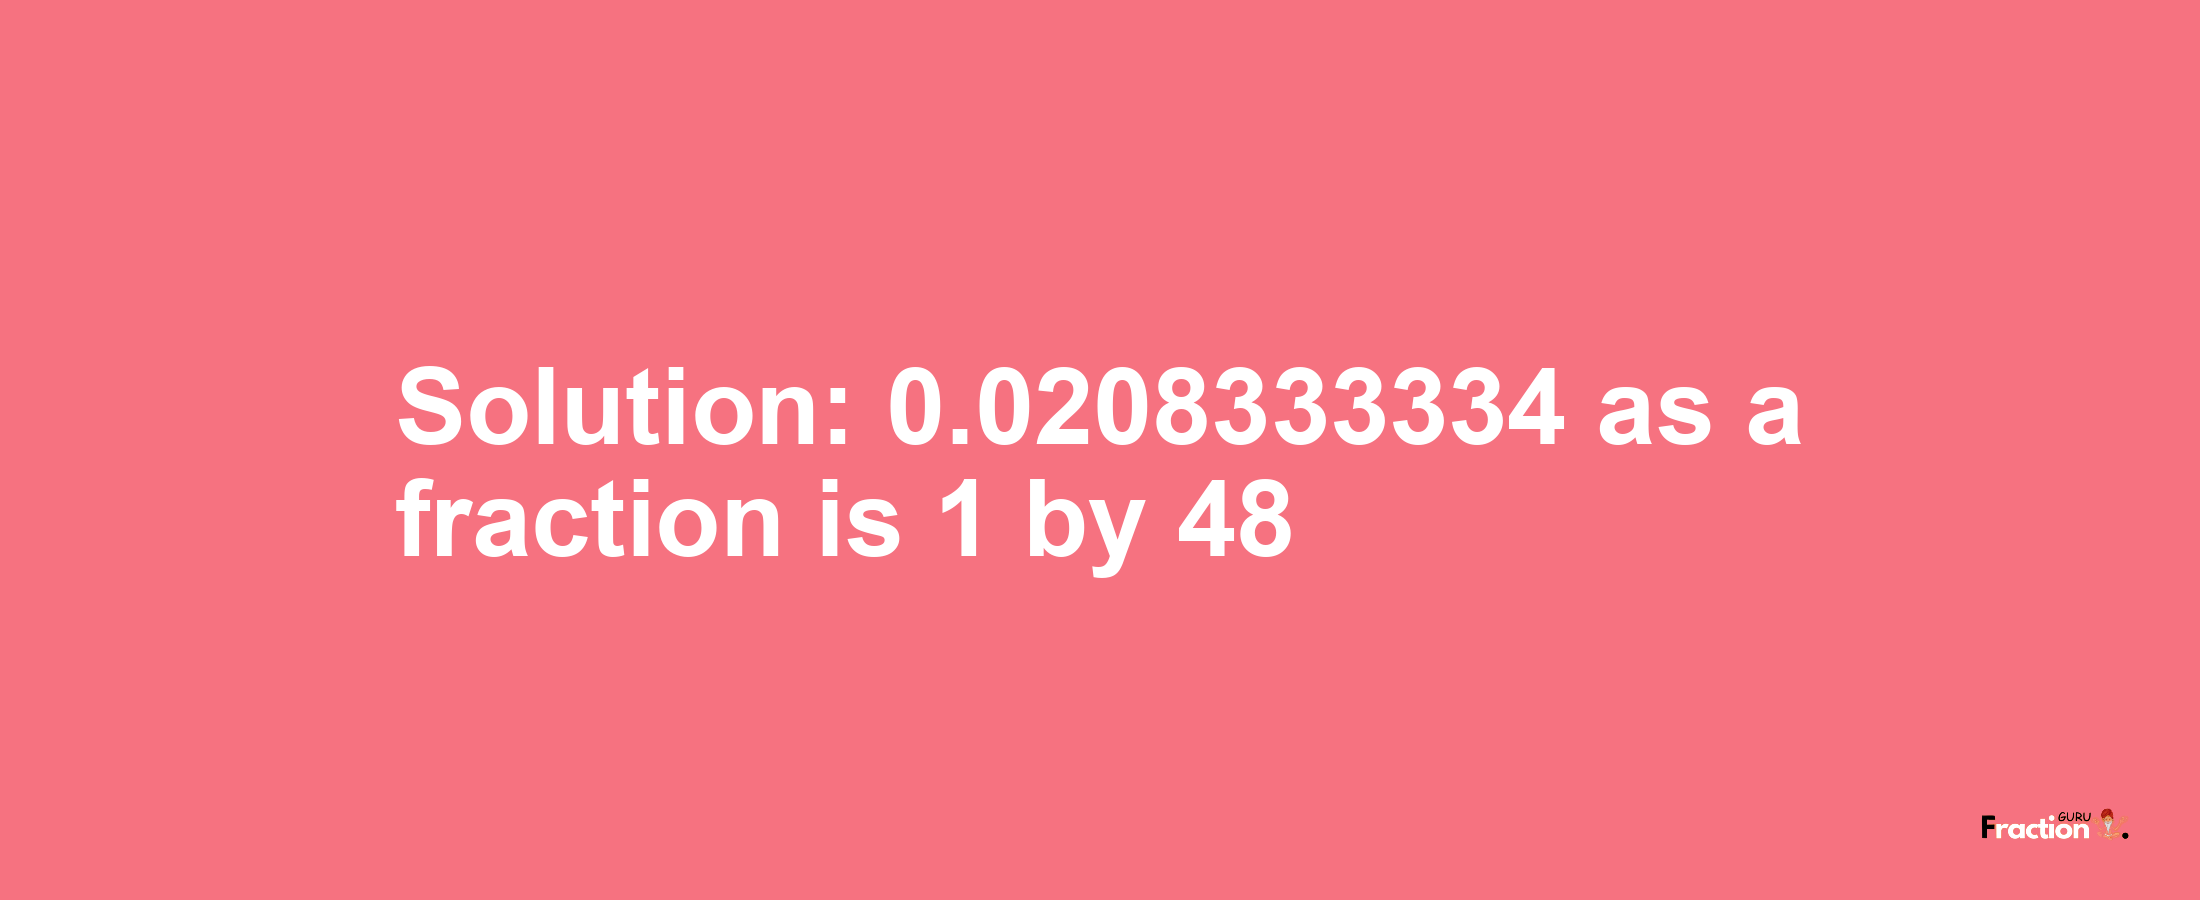 Solution:0.0208333334 as a fraction is 1/48